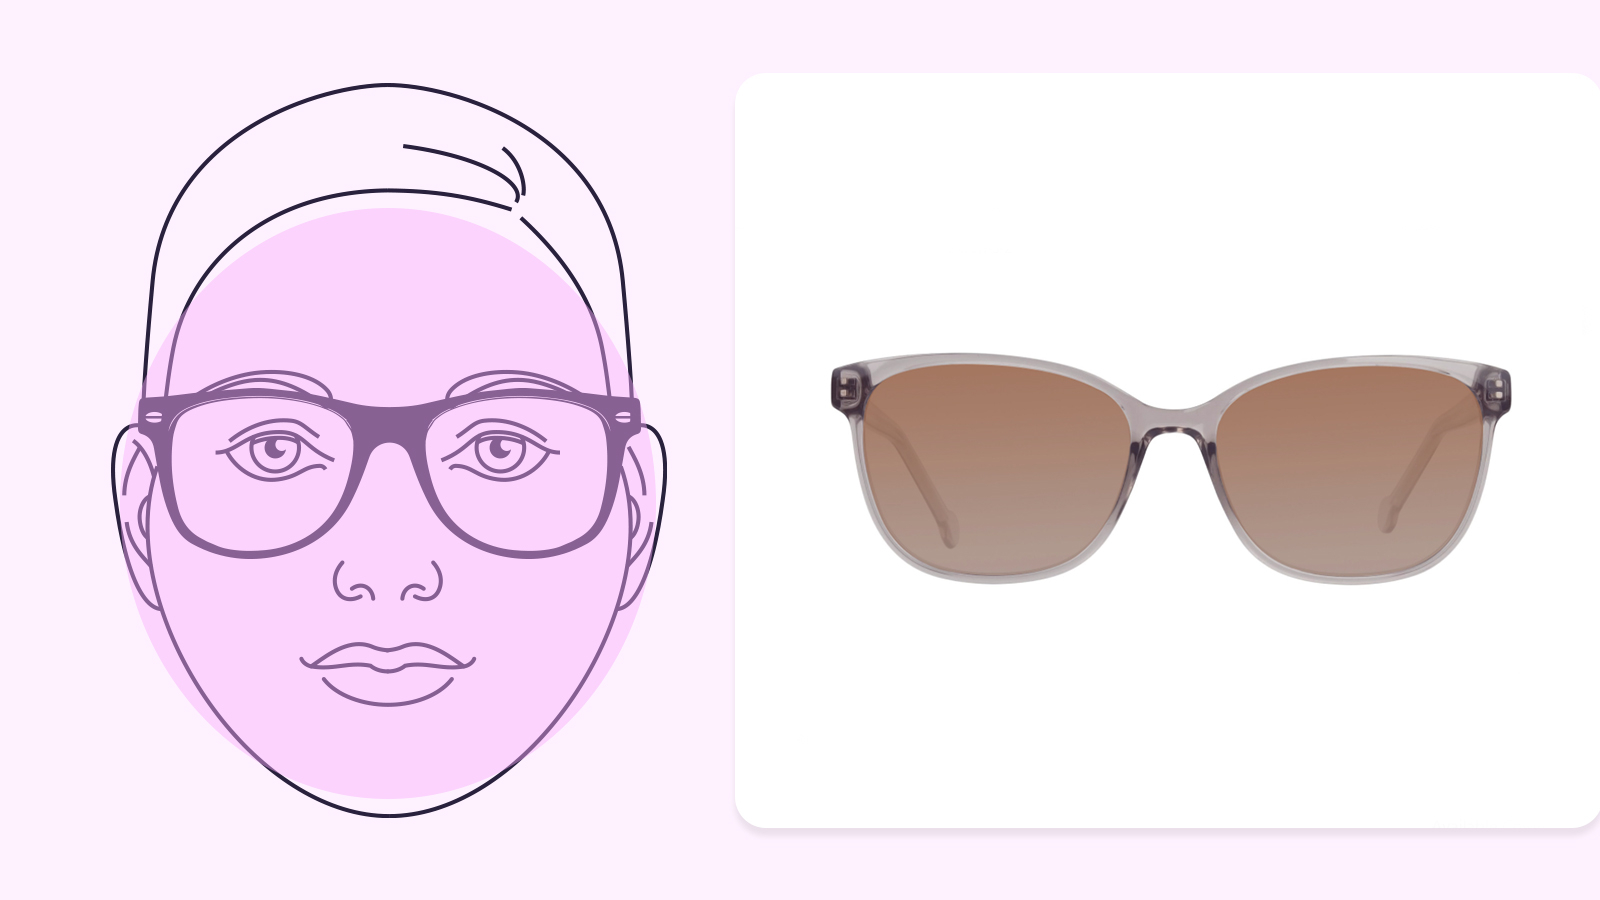 Sunglasses for round face shape